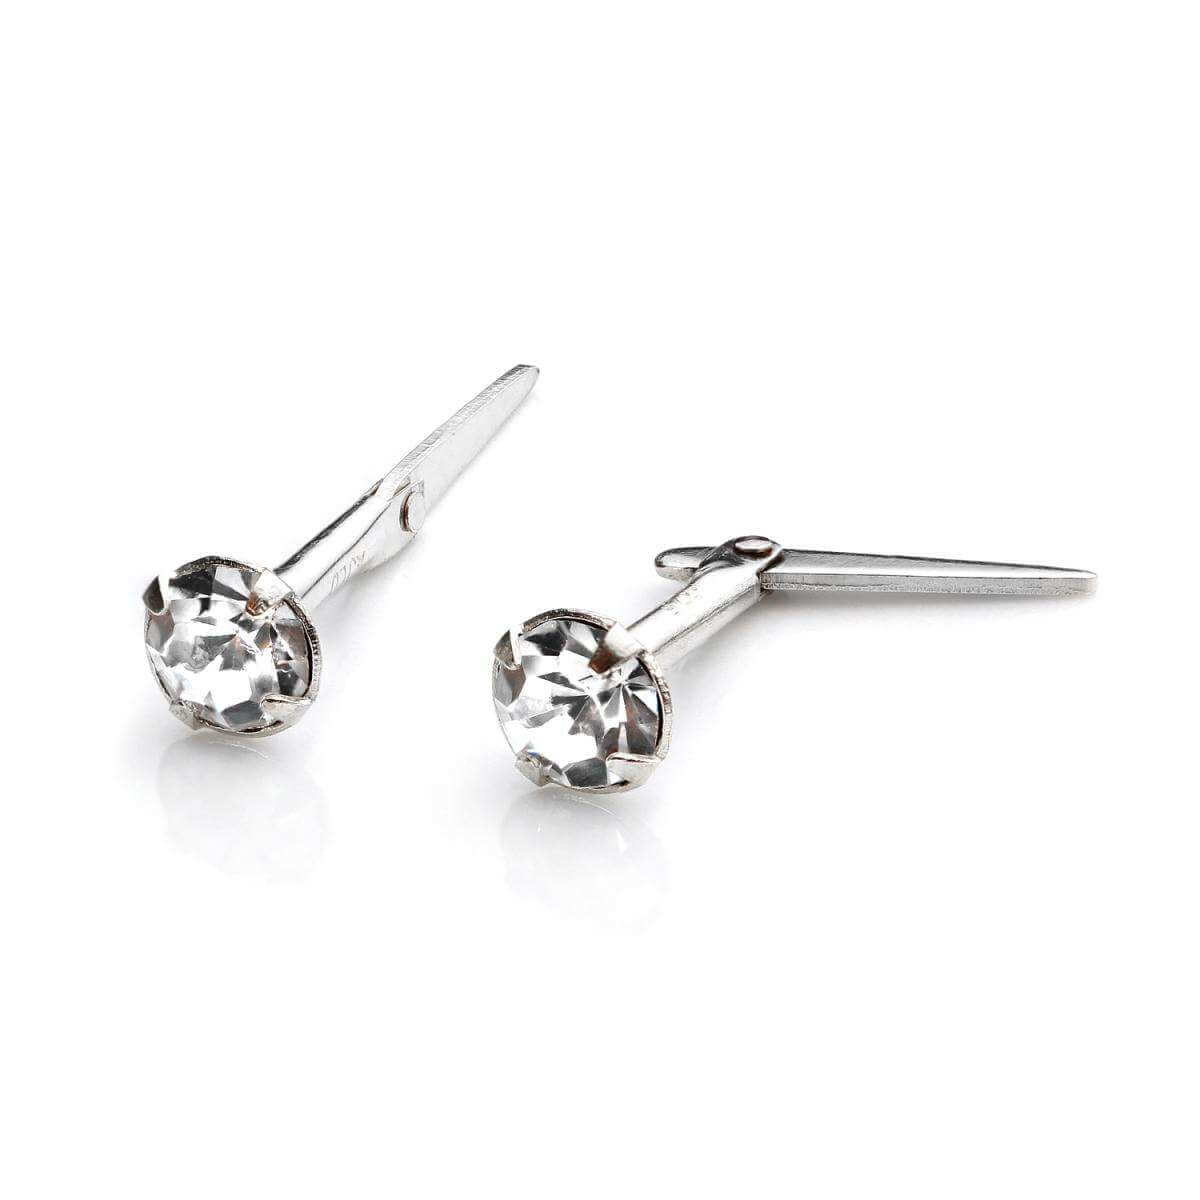 Sterling Silver Andralok Stud Earrings with 3mm Clear Crystal